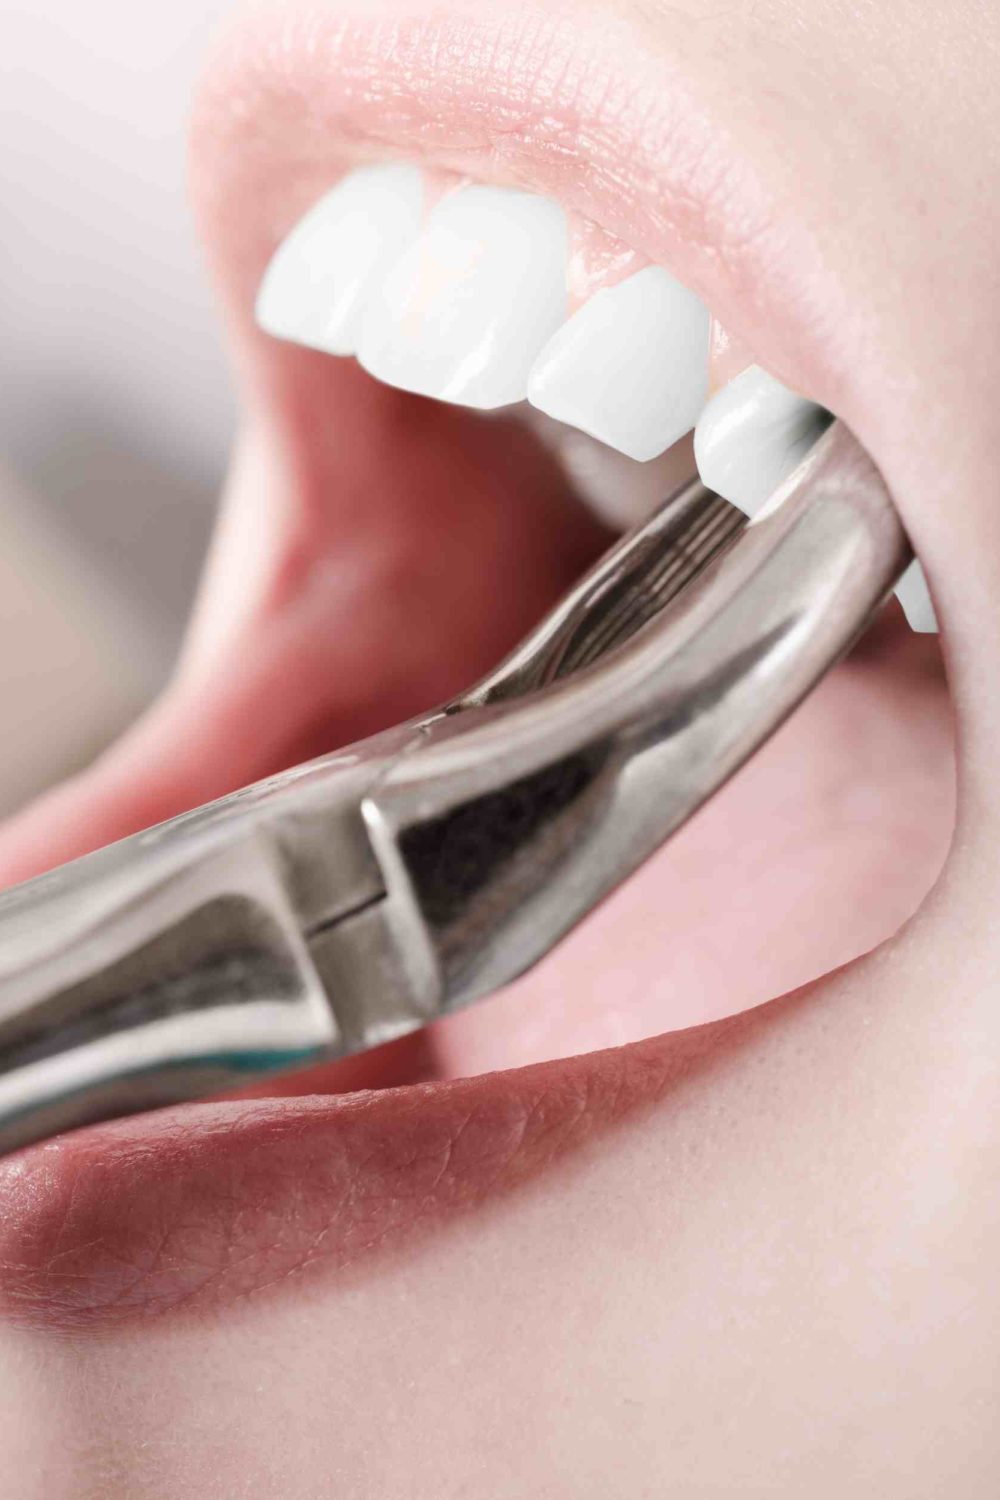 5 Signs You Might Need a Tooth Extraction (And What to Do Next)